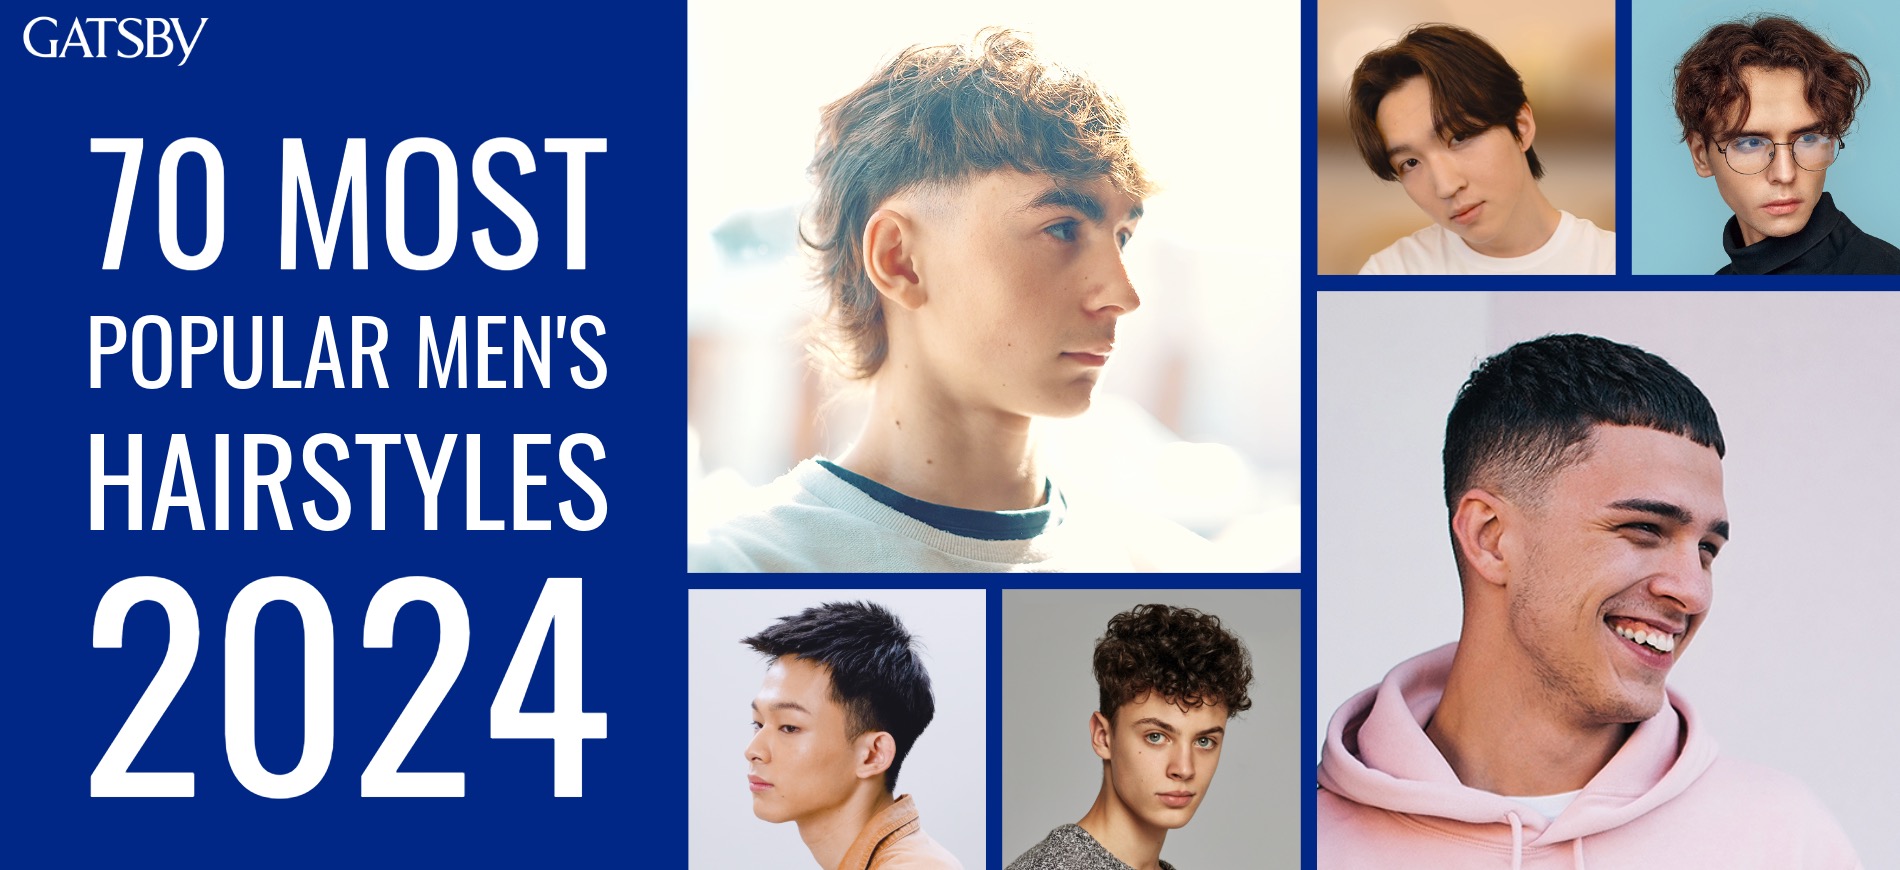 65 Best Haircuts for Men in 2022 — Modern Hairstyles for Men by GATSBY